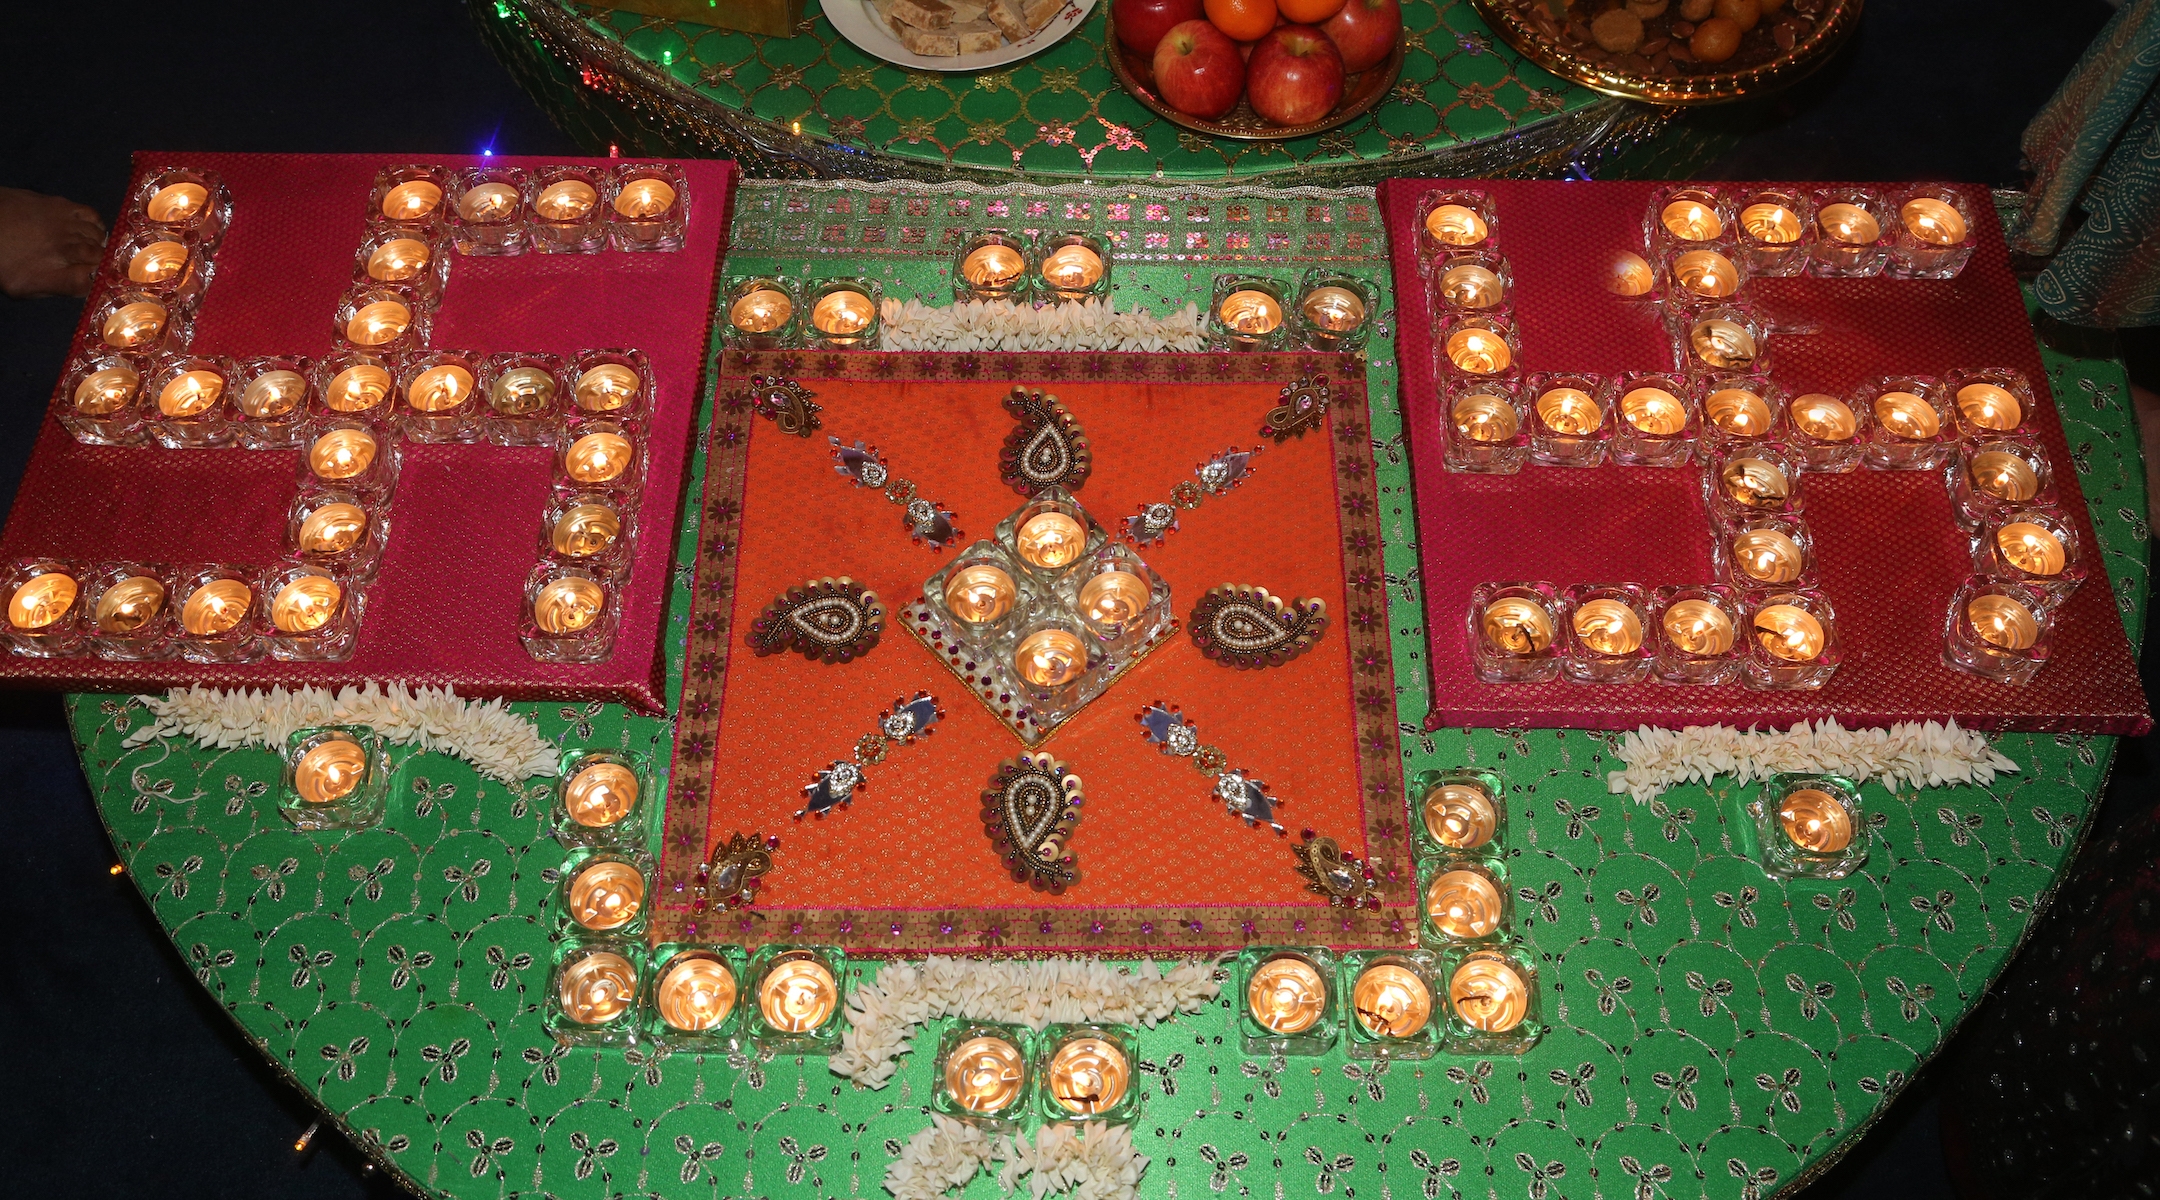 Diyas (lamps) in a swastika pattern by a shrine to the Goddess Lakshmi during the festival of Diwali at a Hindu temple in Toronto, Nov. 7, 2018. (Creative Touch Imaging Ltd./NurPhoto via Getty Images)